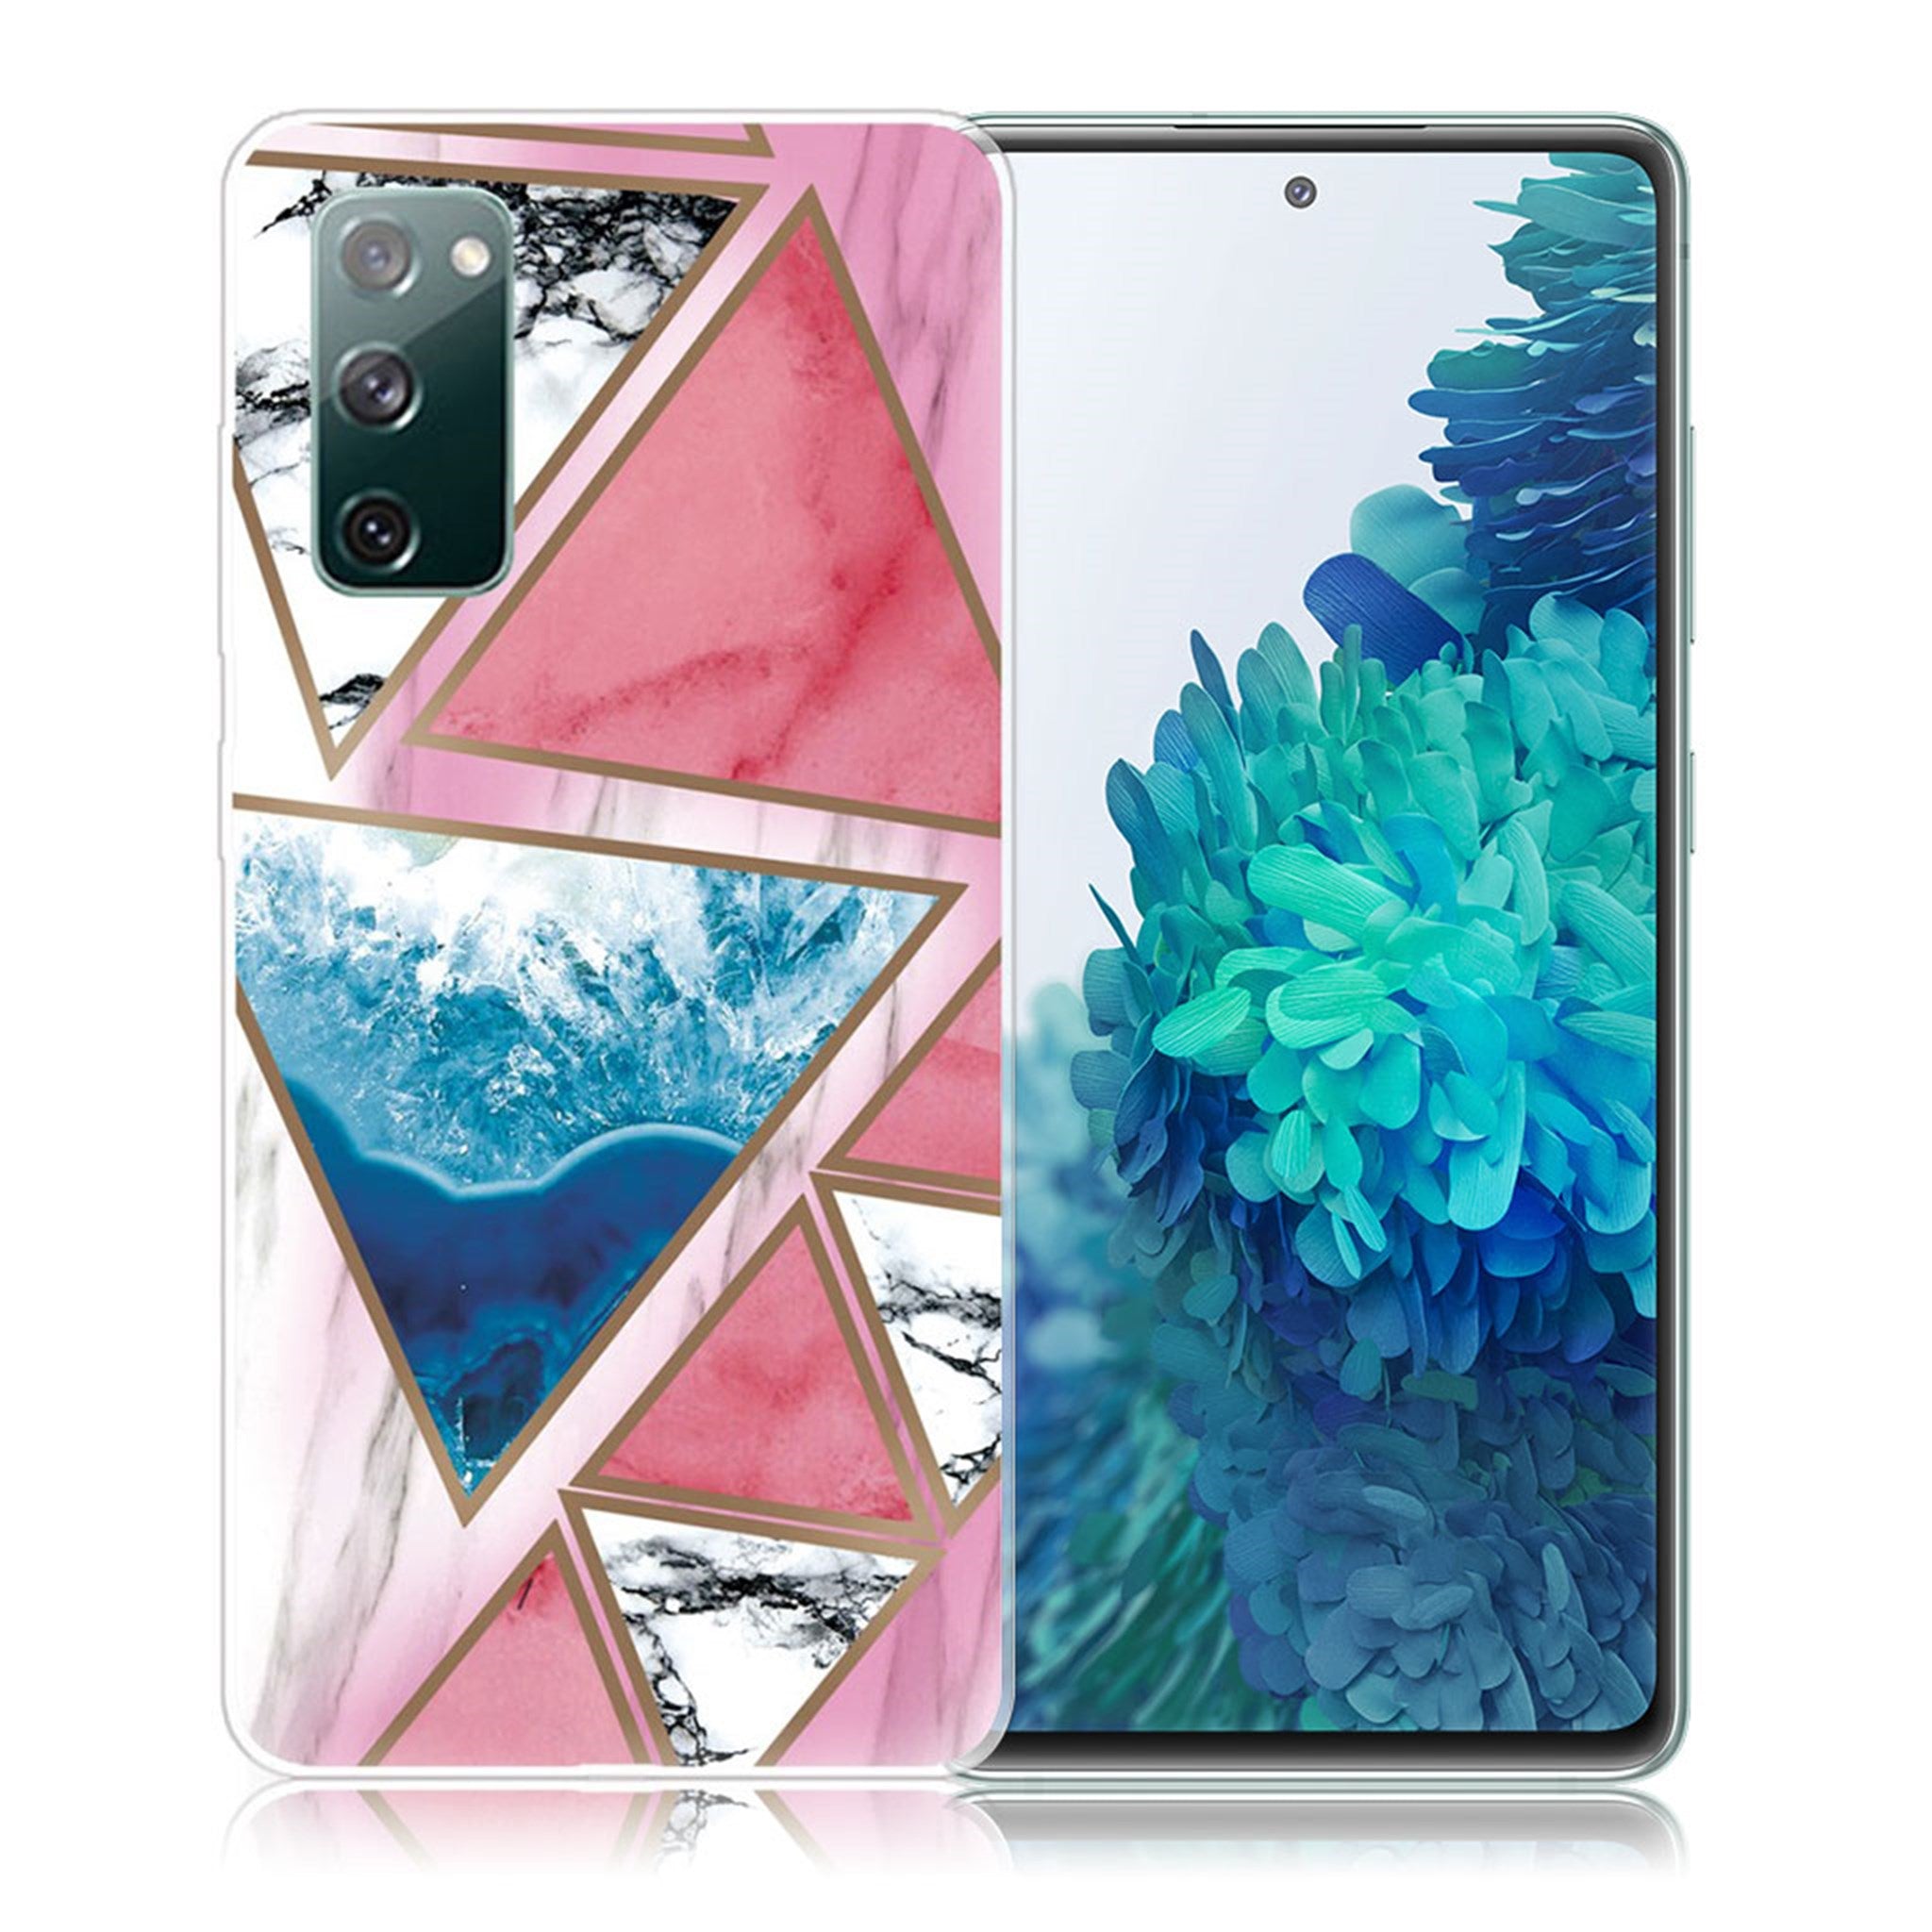 Marble Samsung Galaxy S20 FE 5G / S20 FE case - White / Blue / Rose Triangle